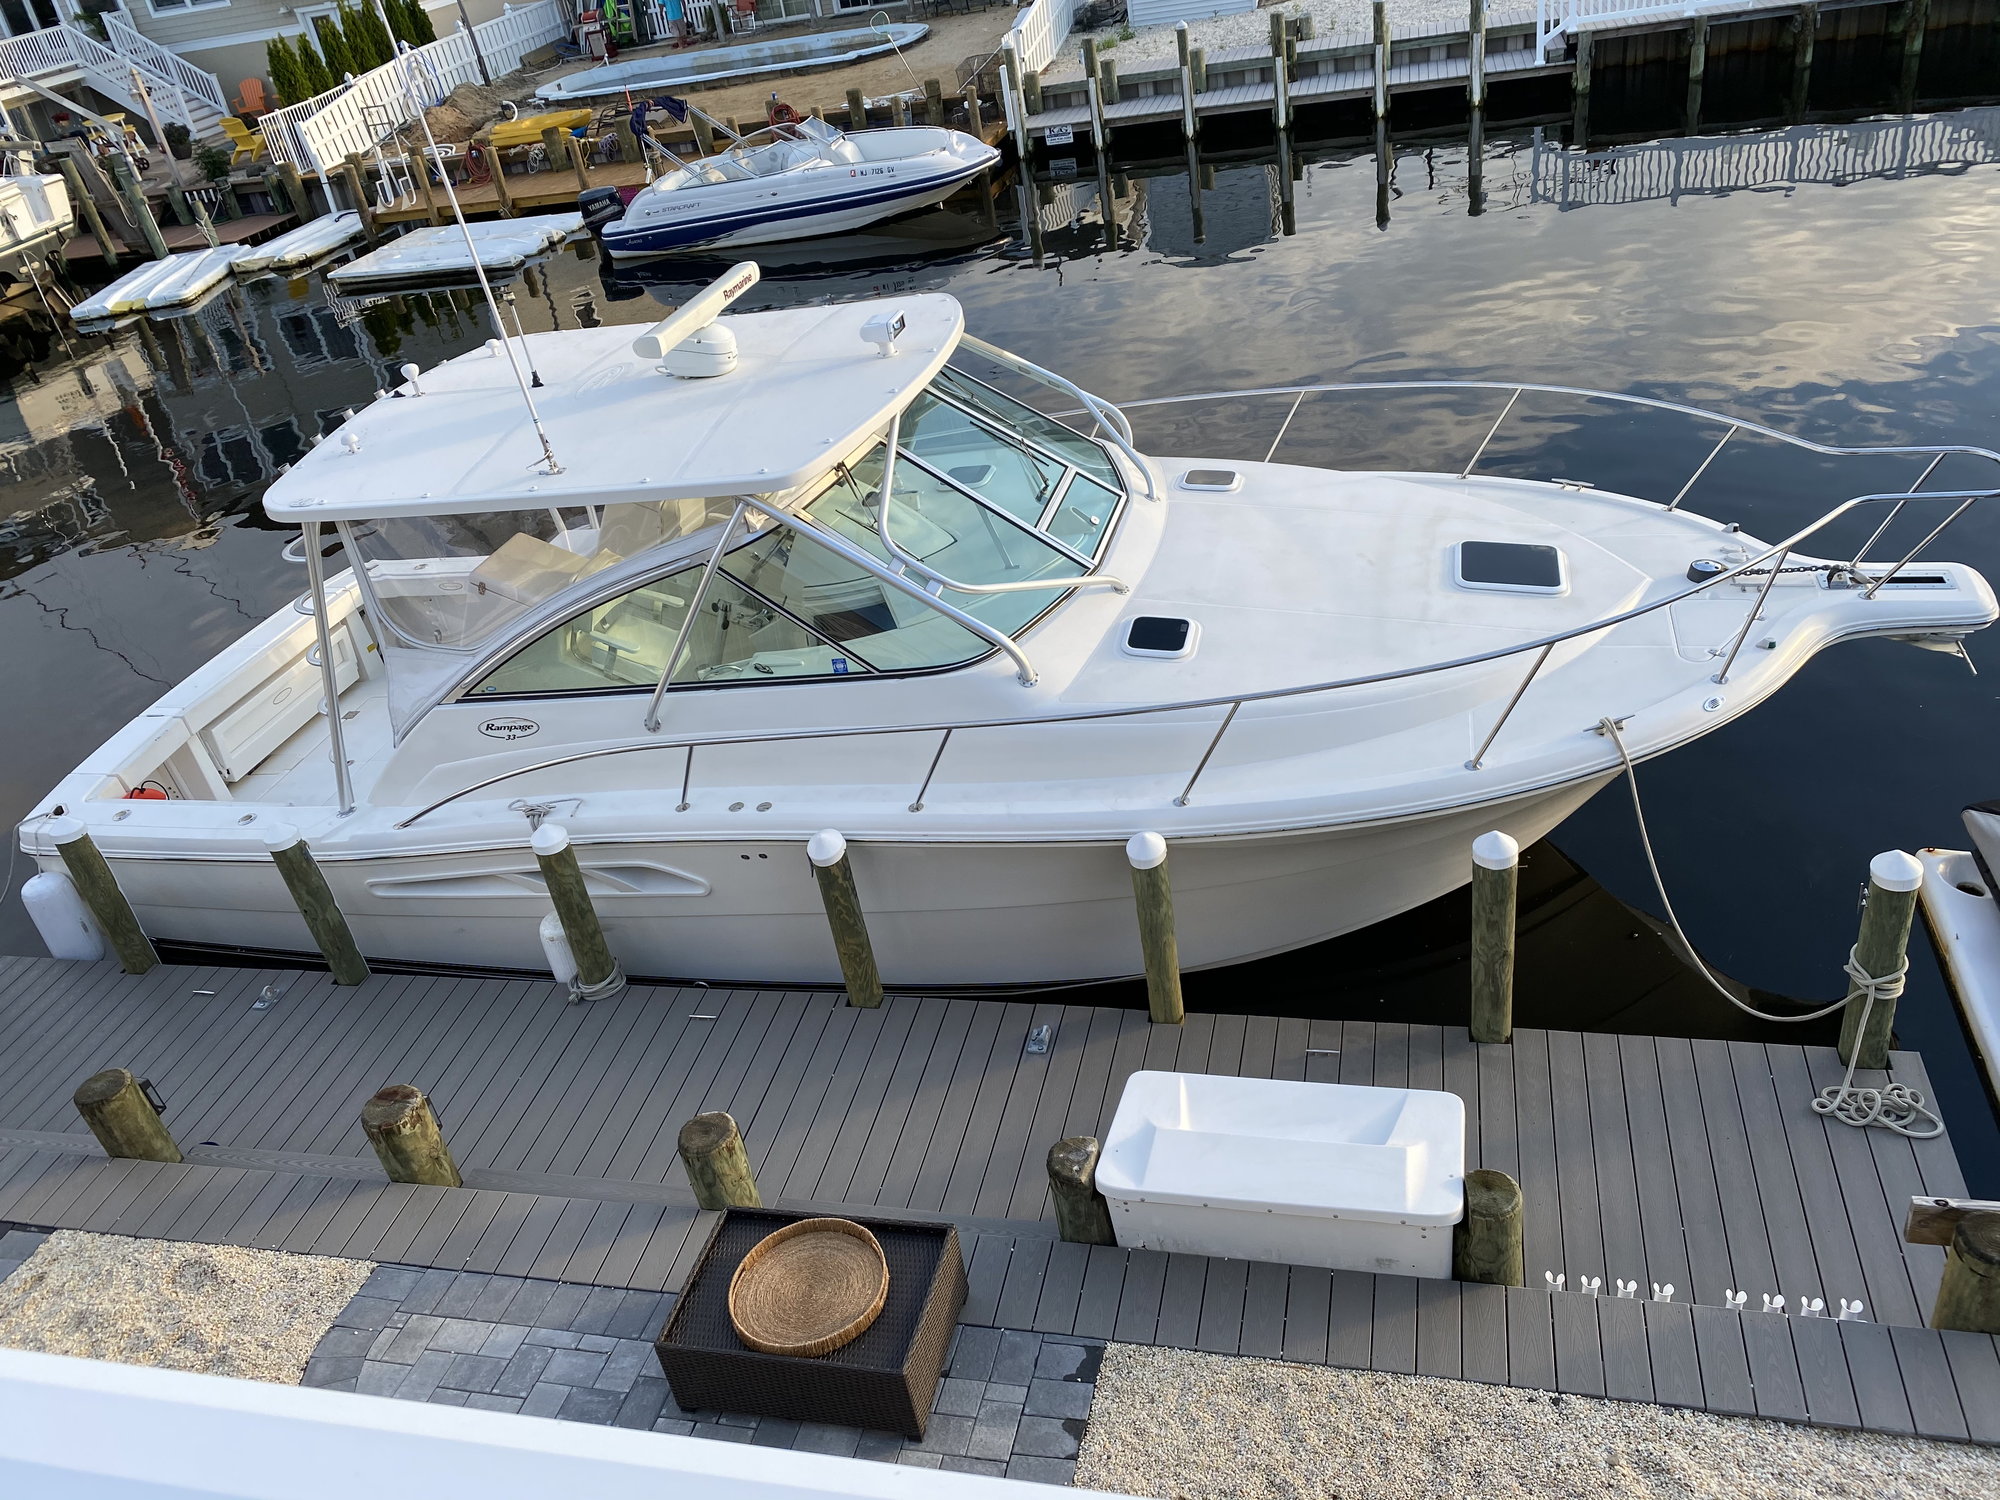 How to pick right radar mount - The Hull Truth - Boating and